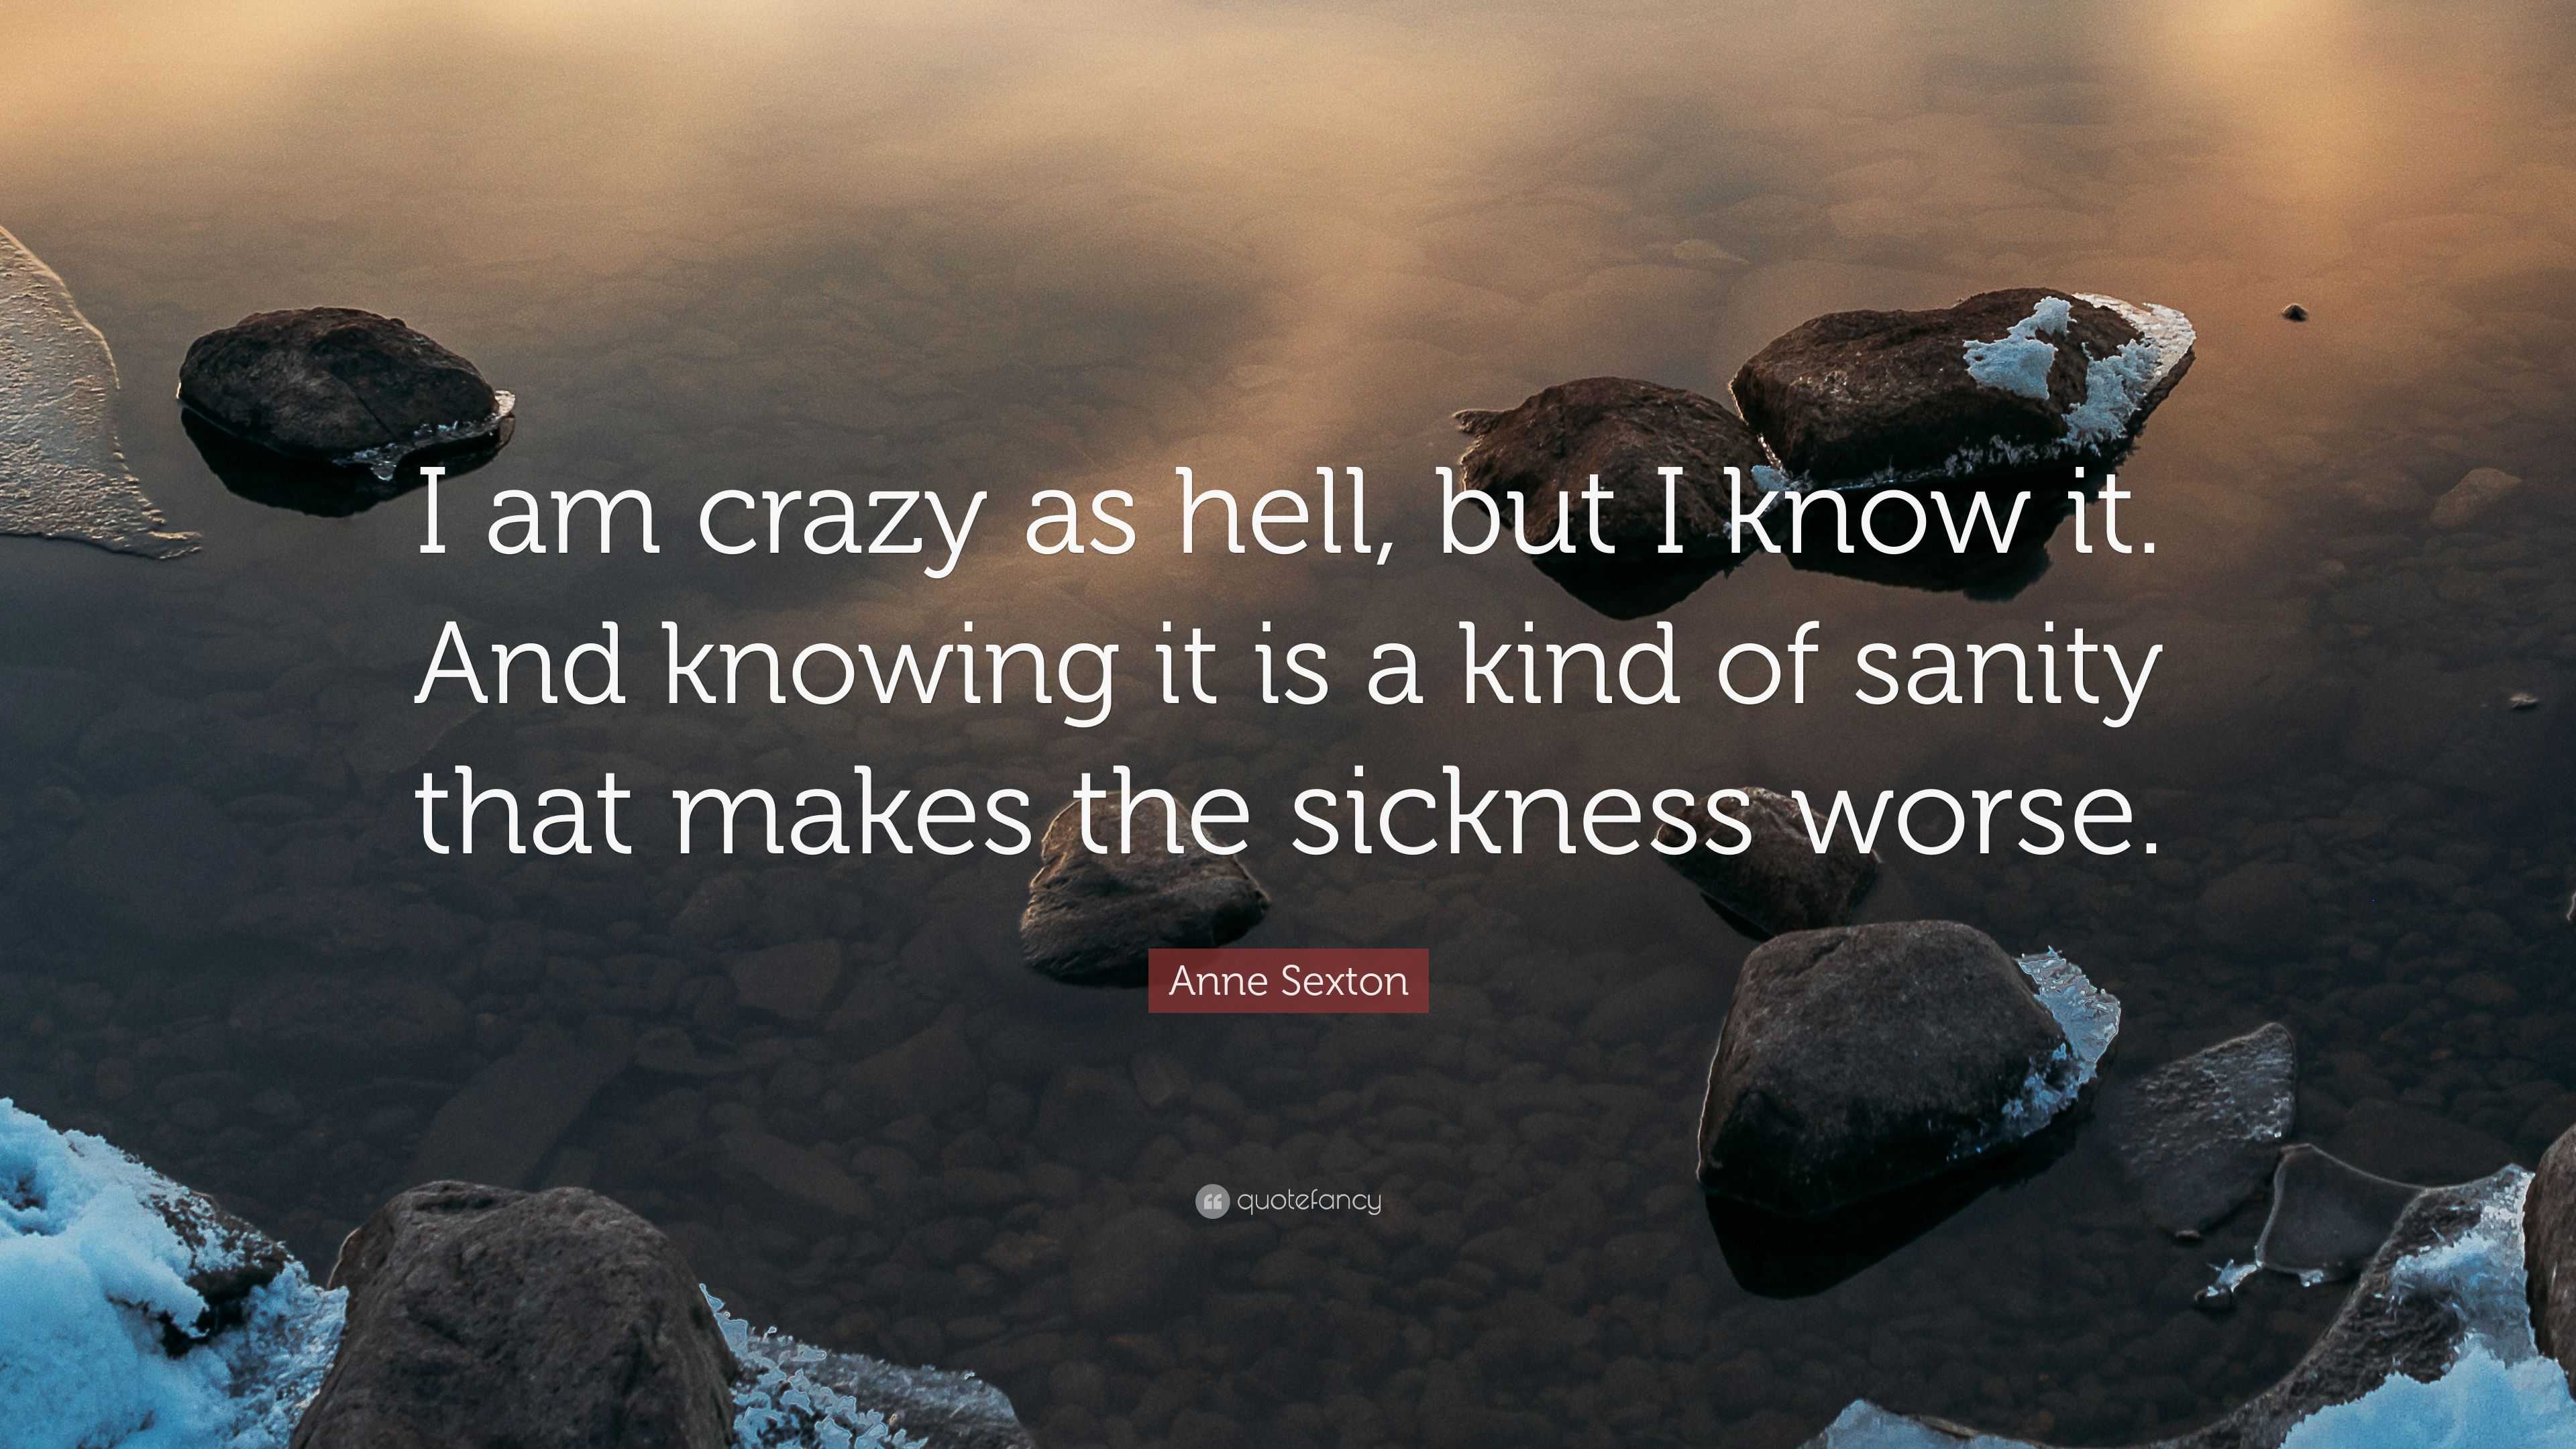 Anne Sexton Quote: "I am crazy as hell, but I know it. And ...